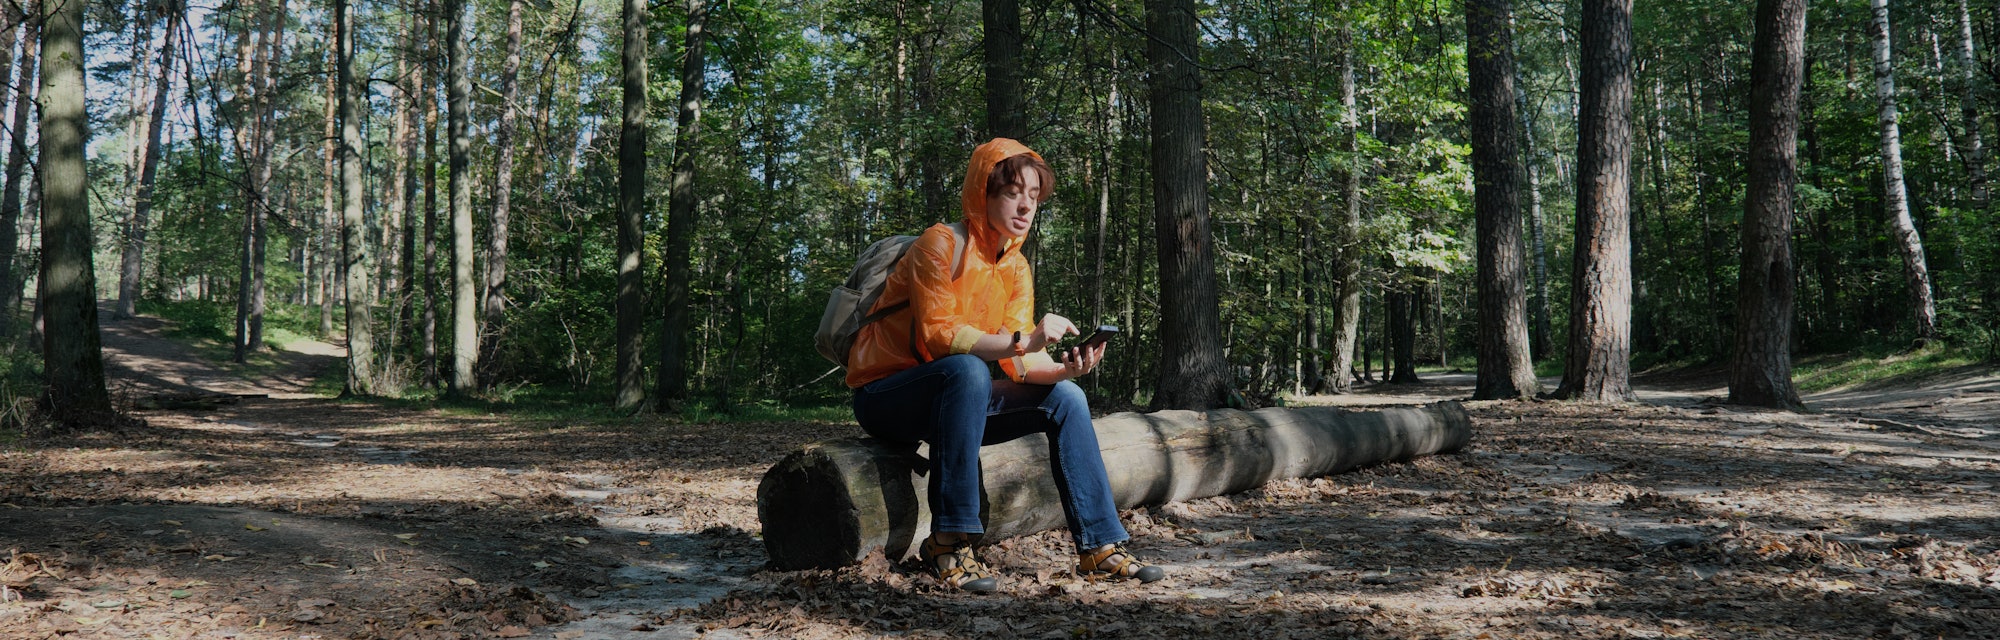 Mature woman hiking in forest is trying to get the direction using GPS in her smart phone